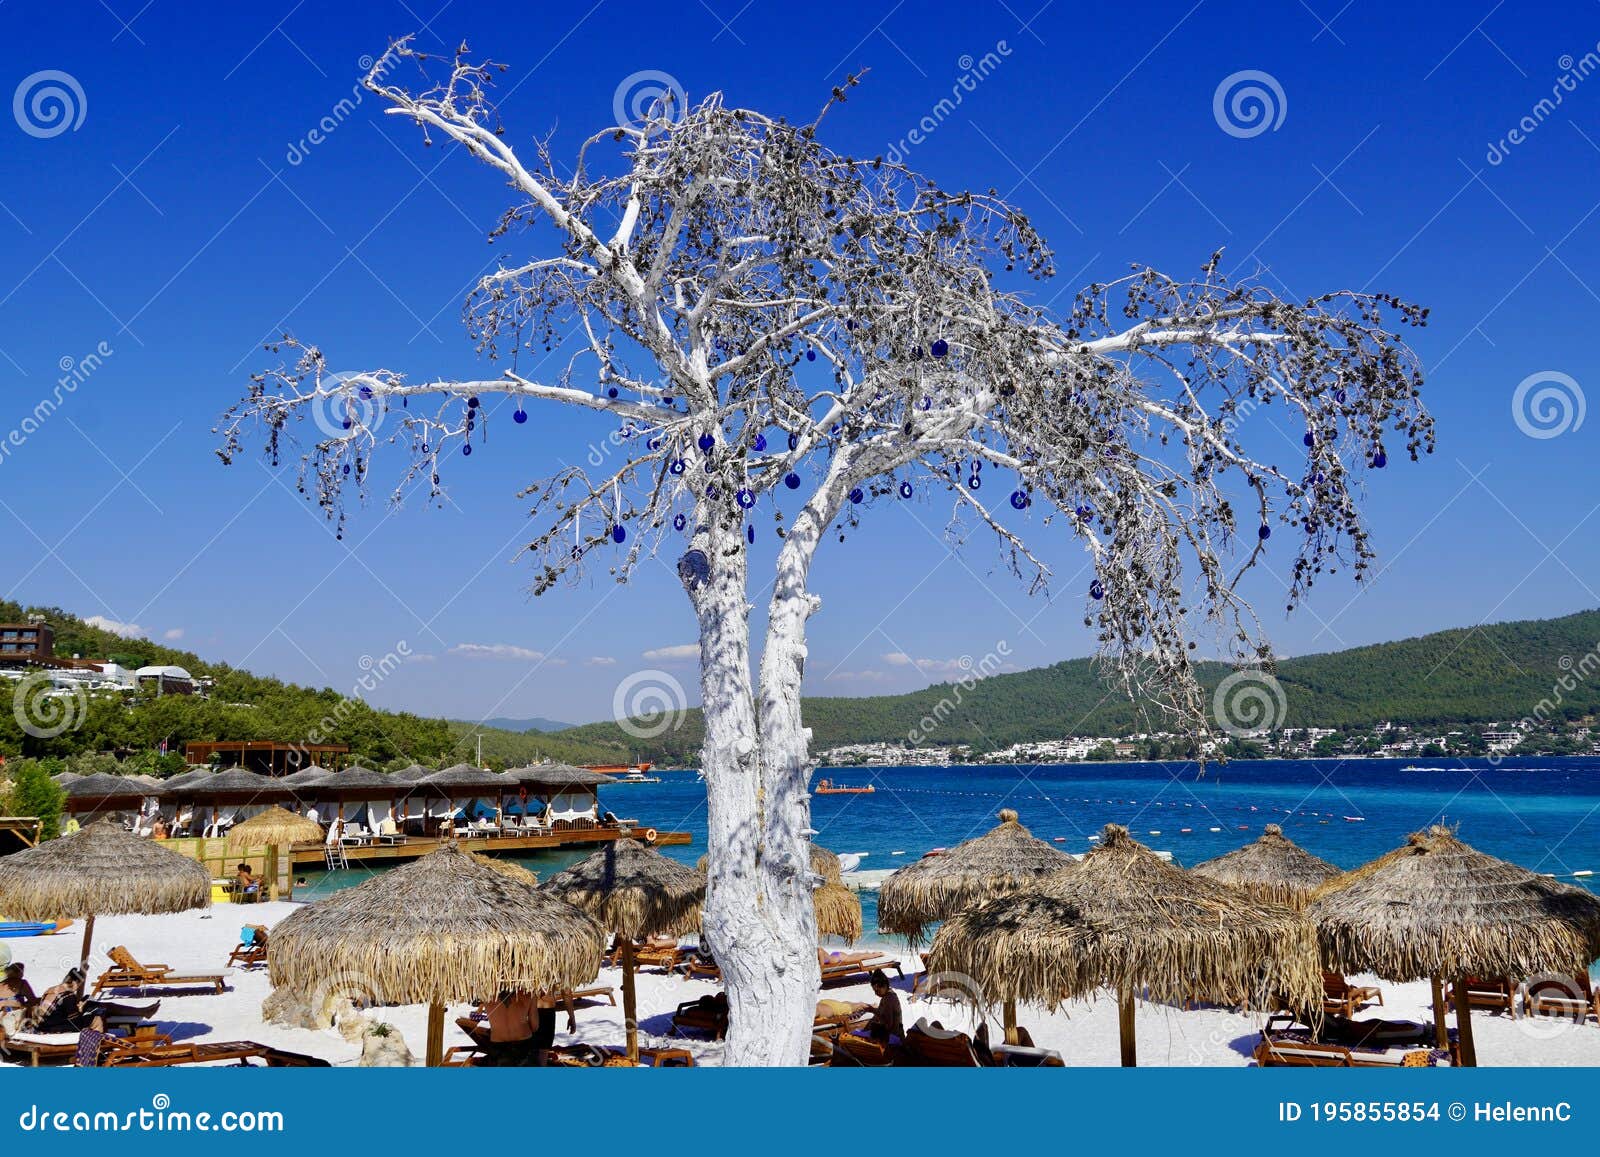 bodrum, turkey - august 2020: lujo`s snow white beach with baboon umbrellas, wooden sunbeds, emerald colored aegean sea